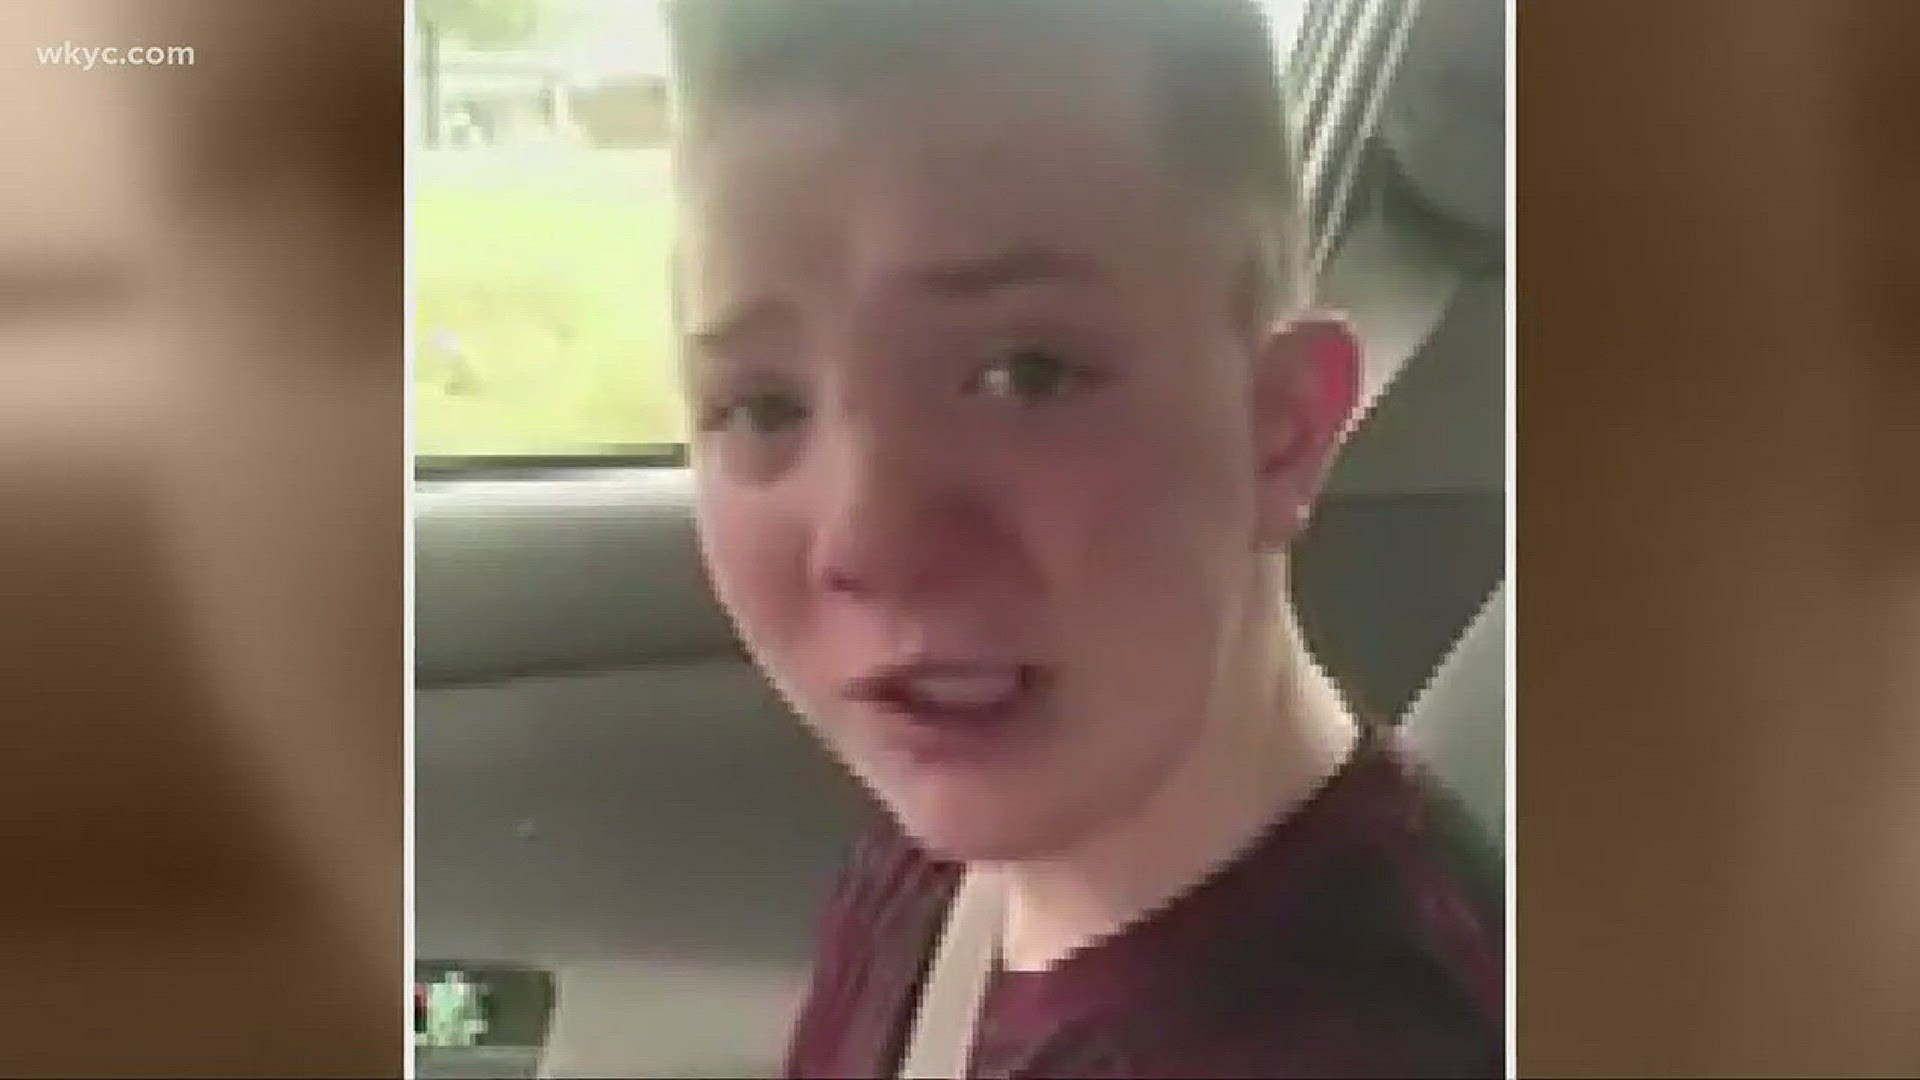 Viral video reignites conversations concerning bullying